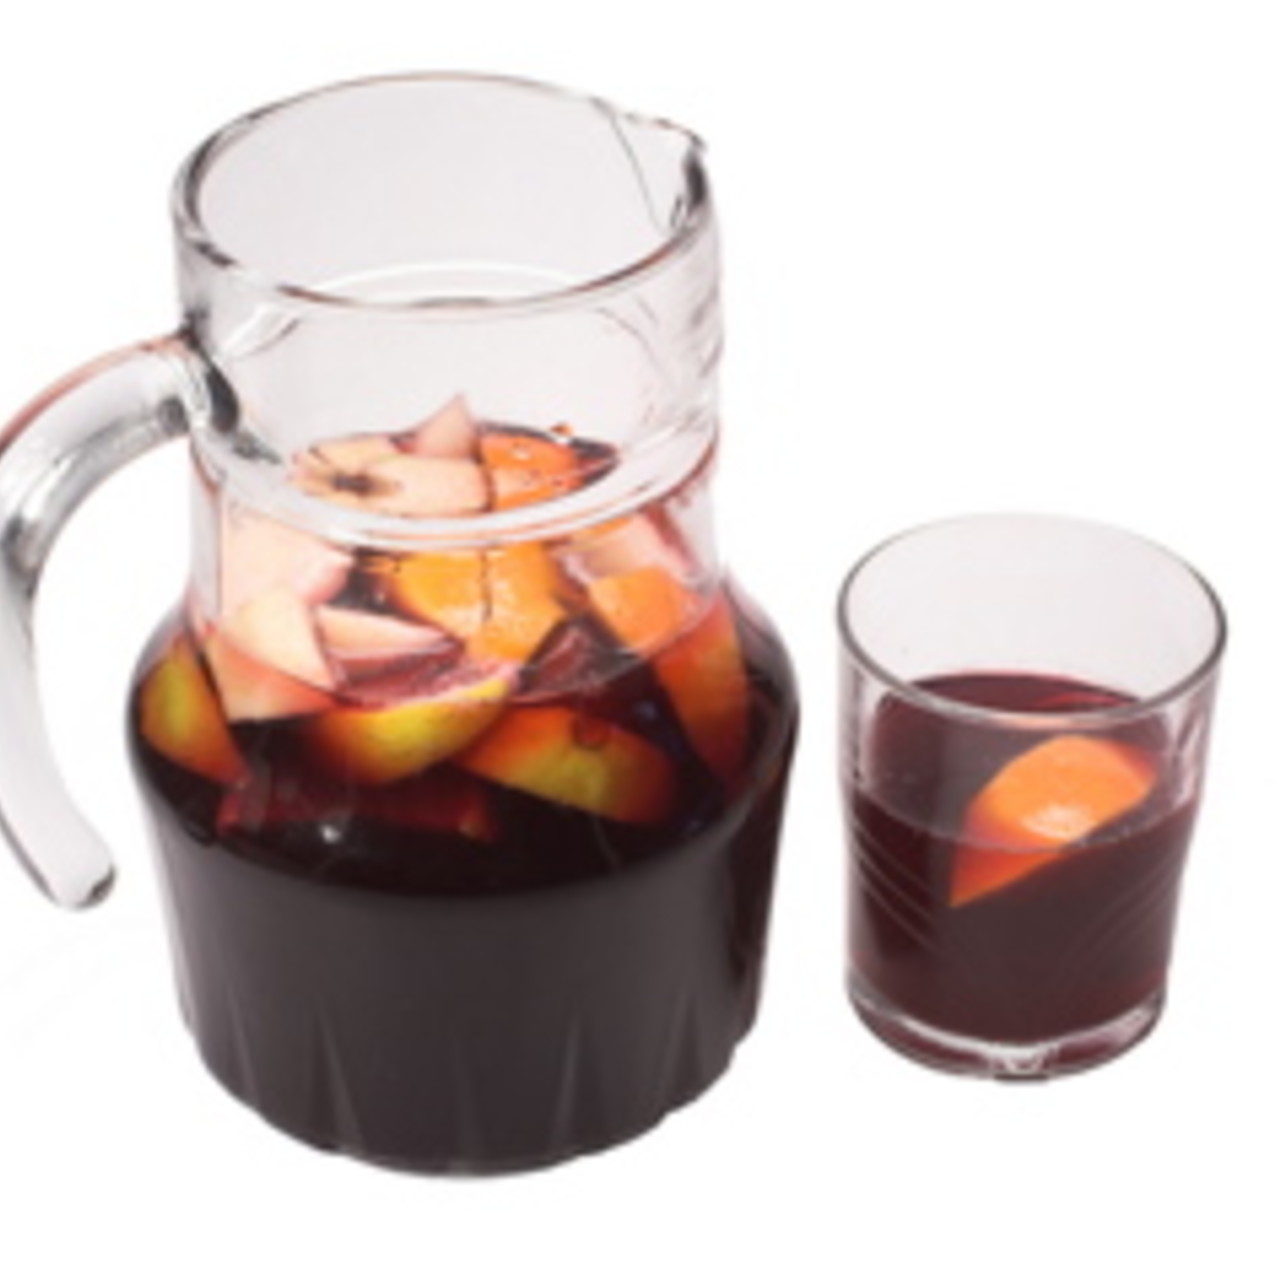 Sangria set alcohol iced drink. Stock Photo by ©Nadianb 206452942